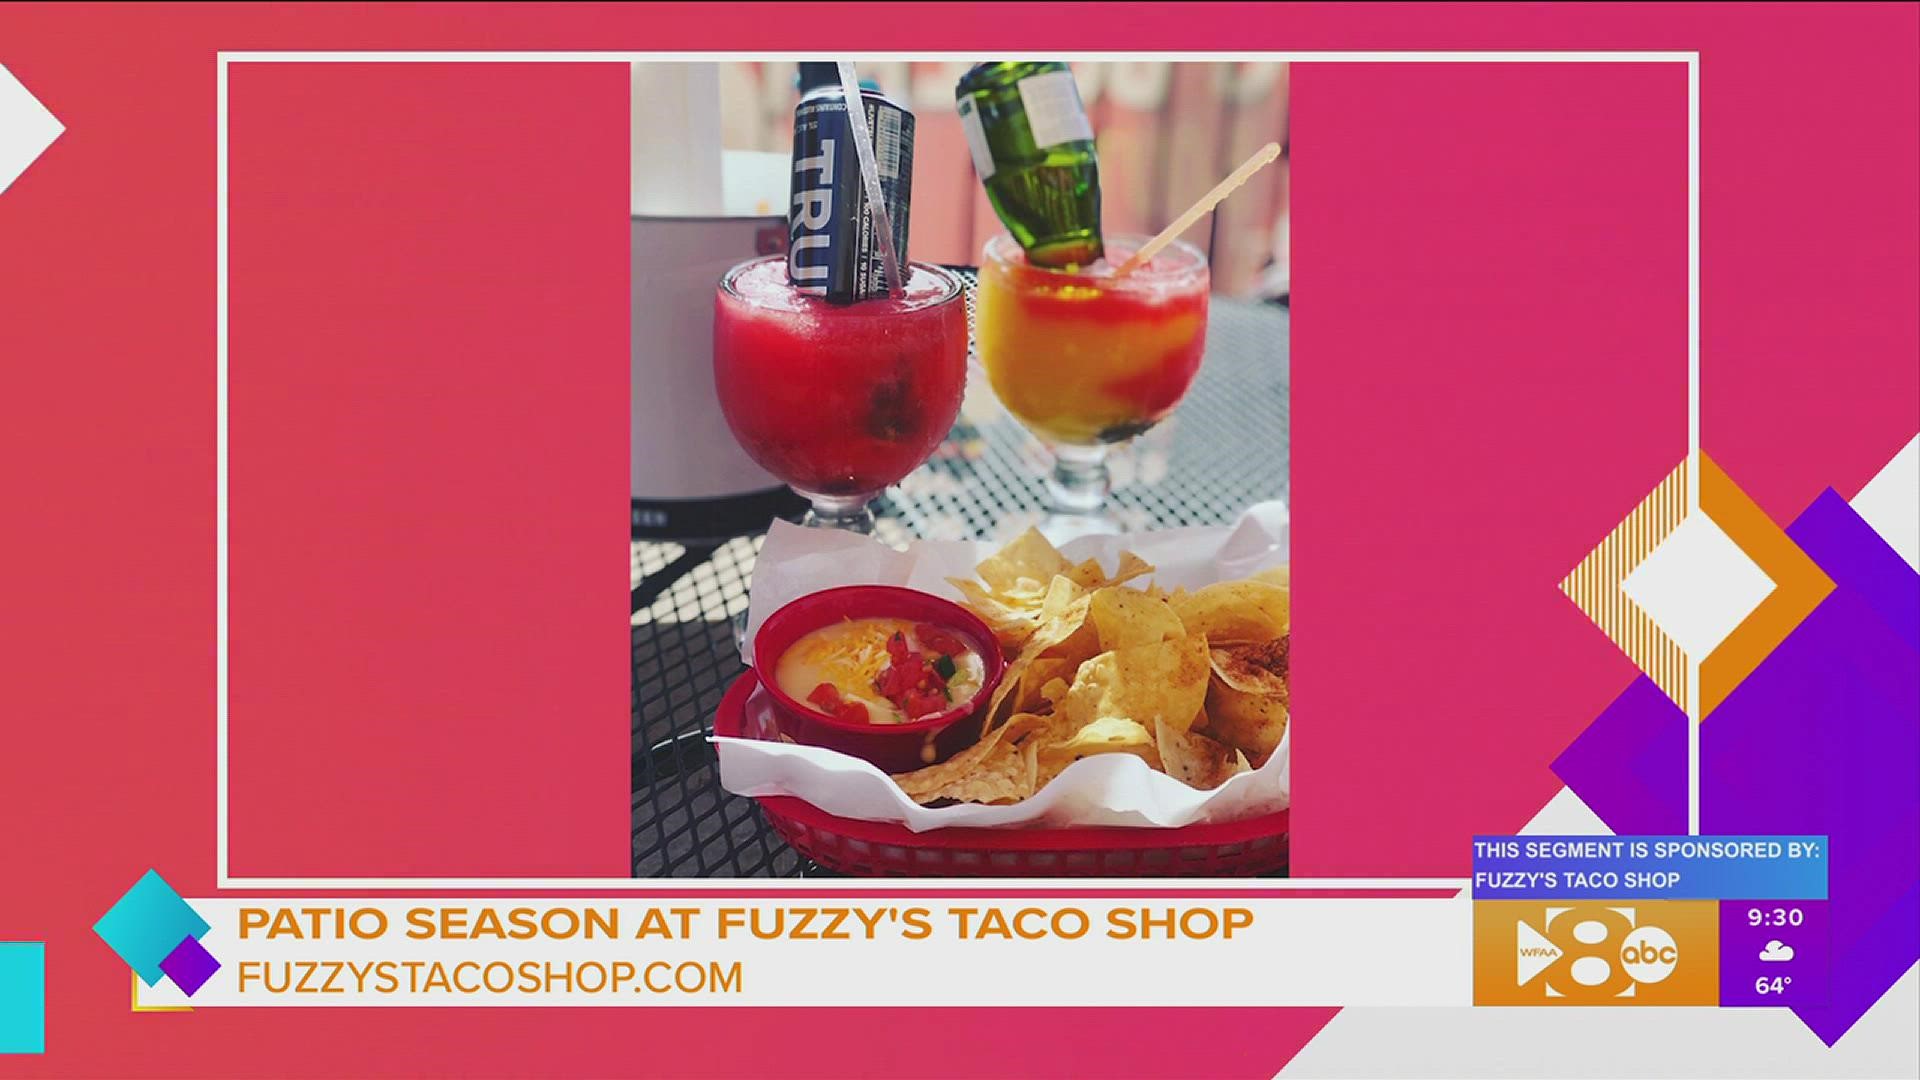 This segment is sponsored by Fuzzy’s Taco Shop.